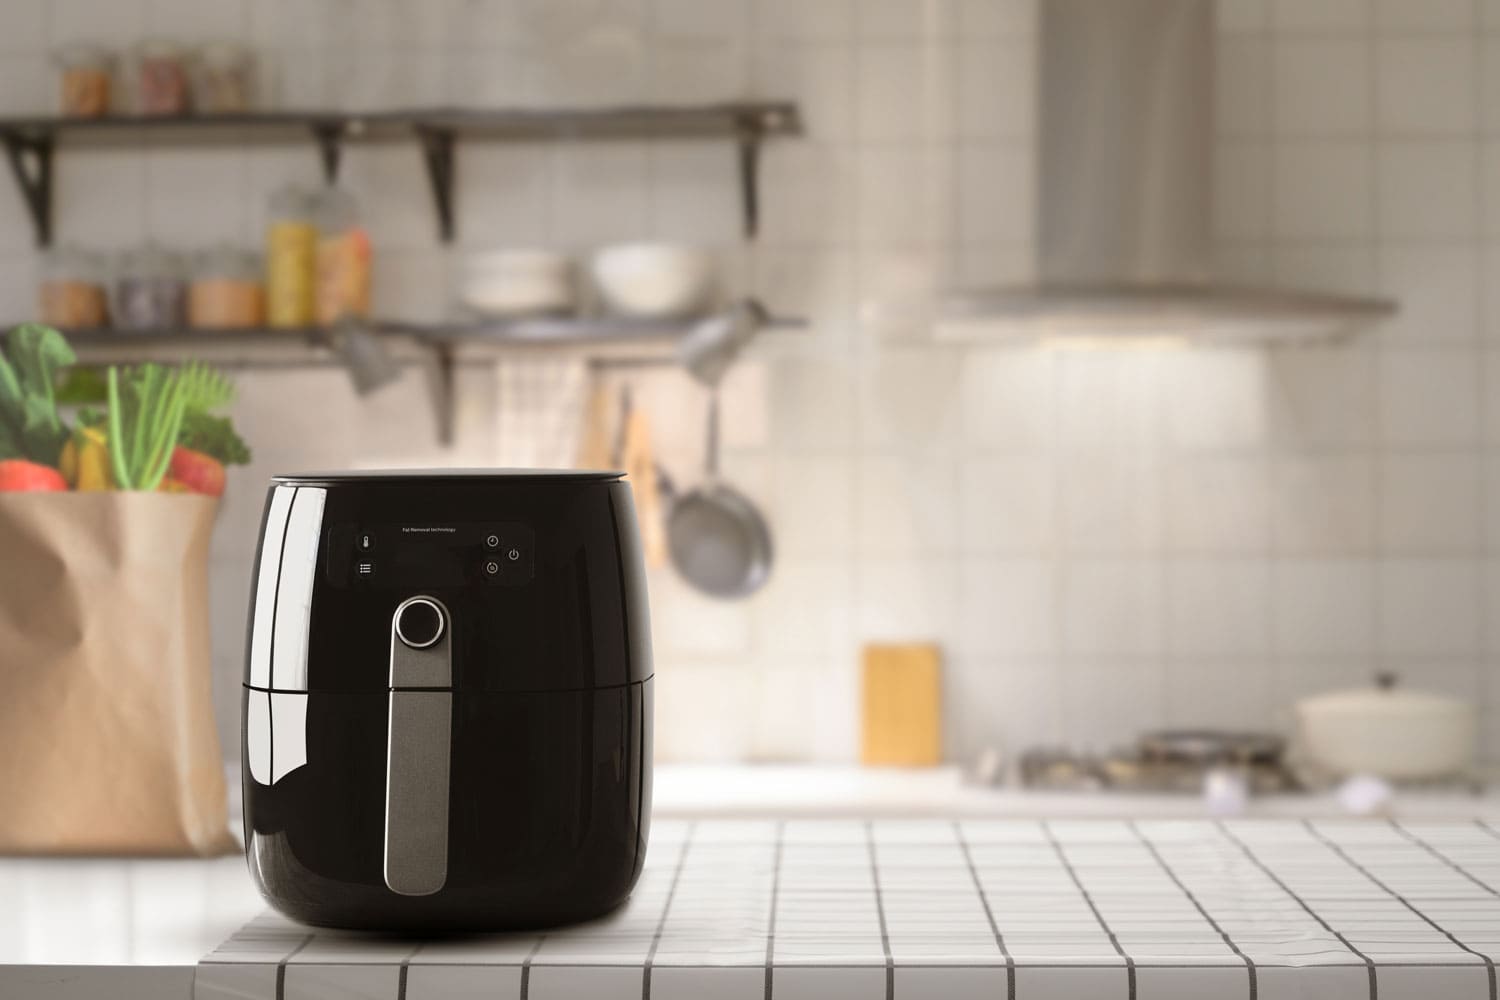 A black air fryer placed on the table